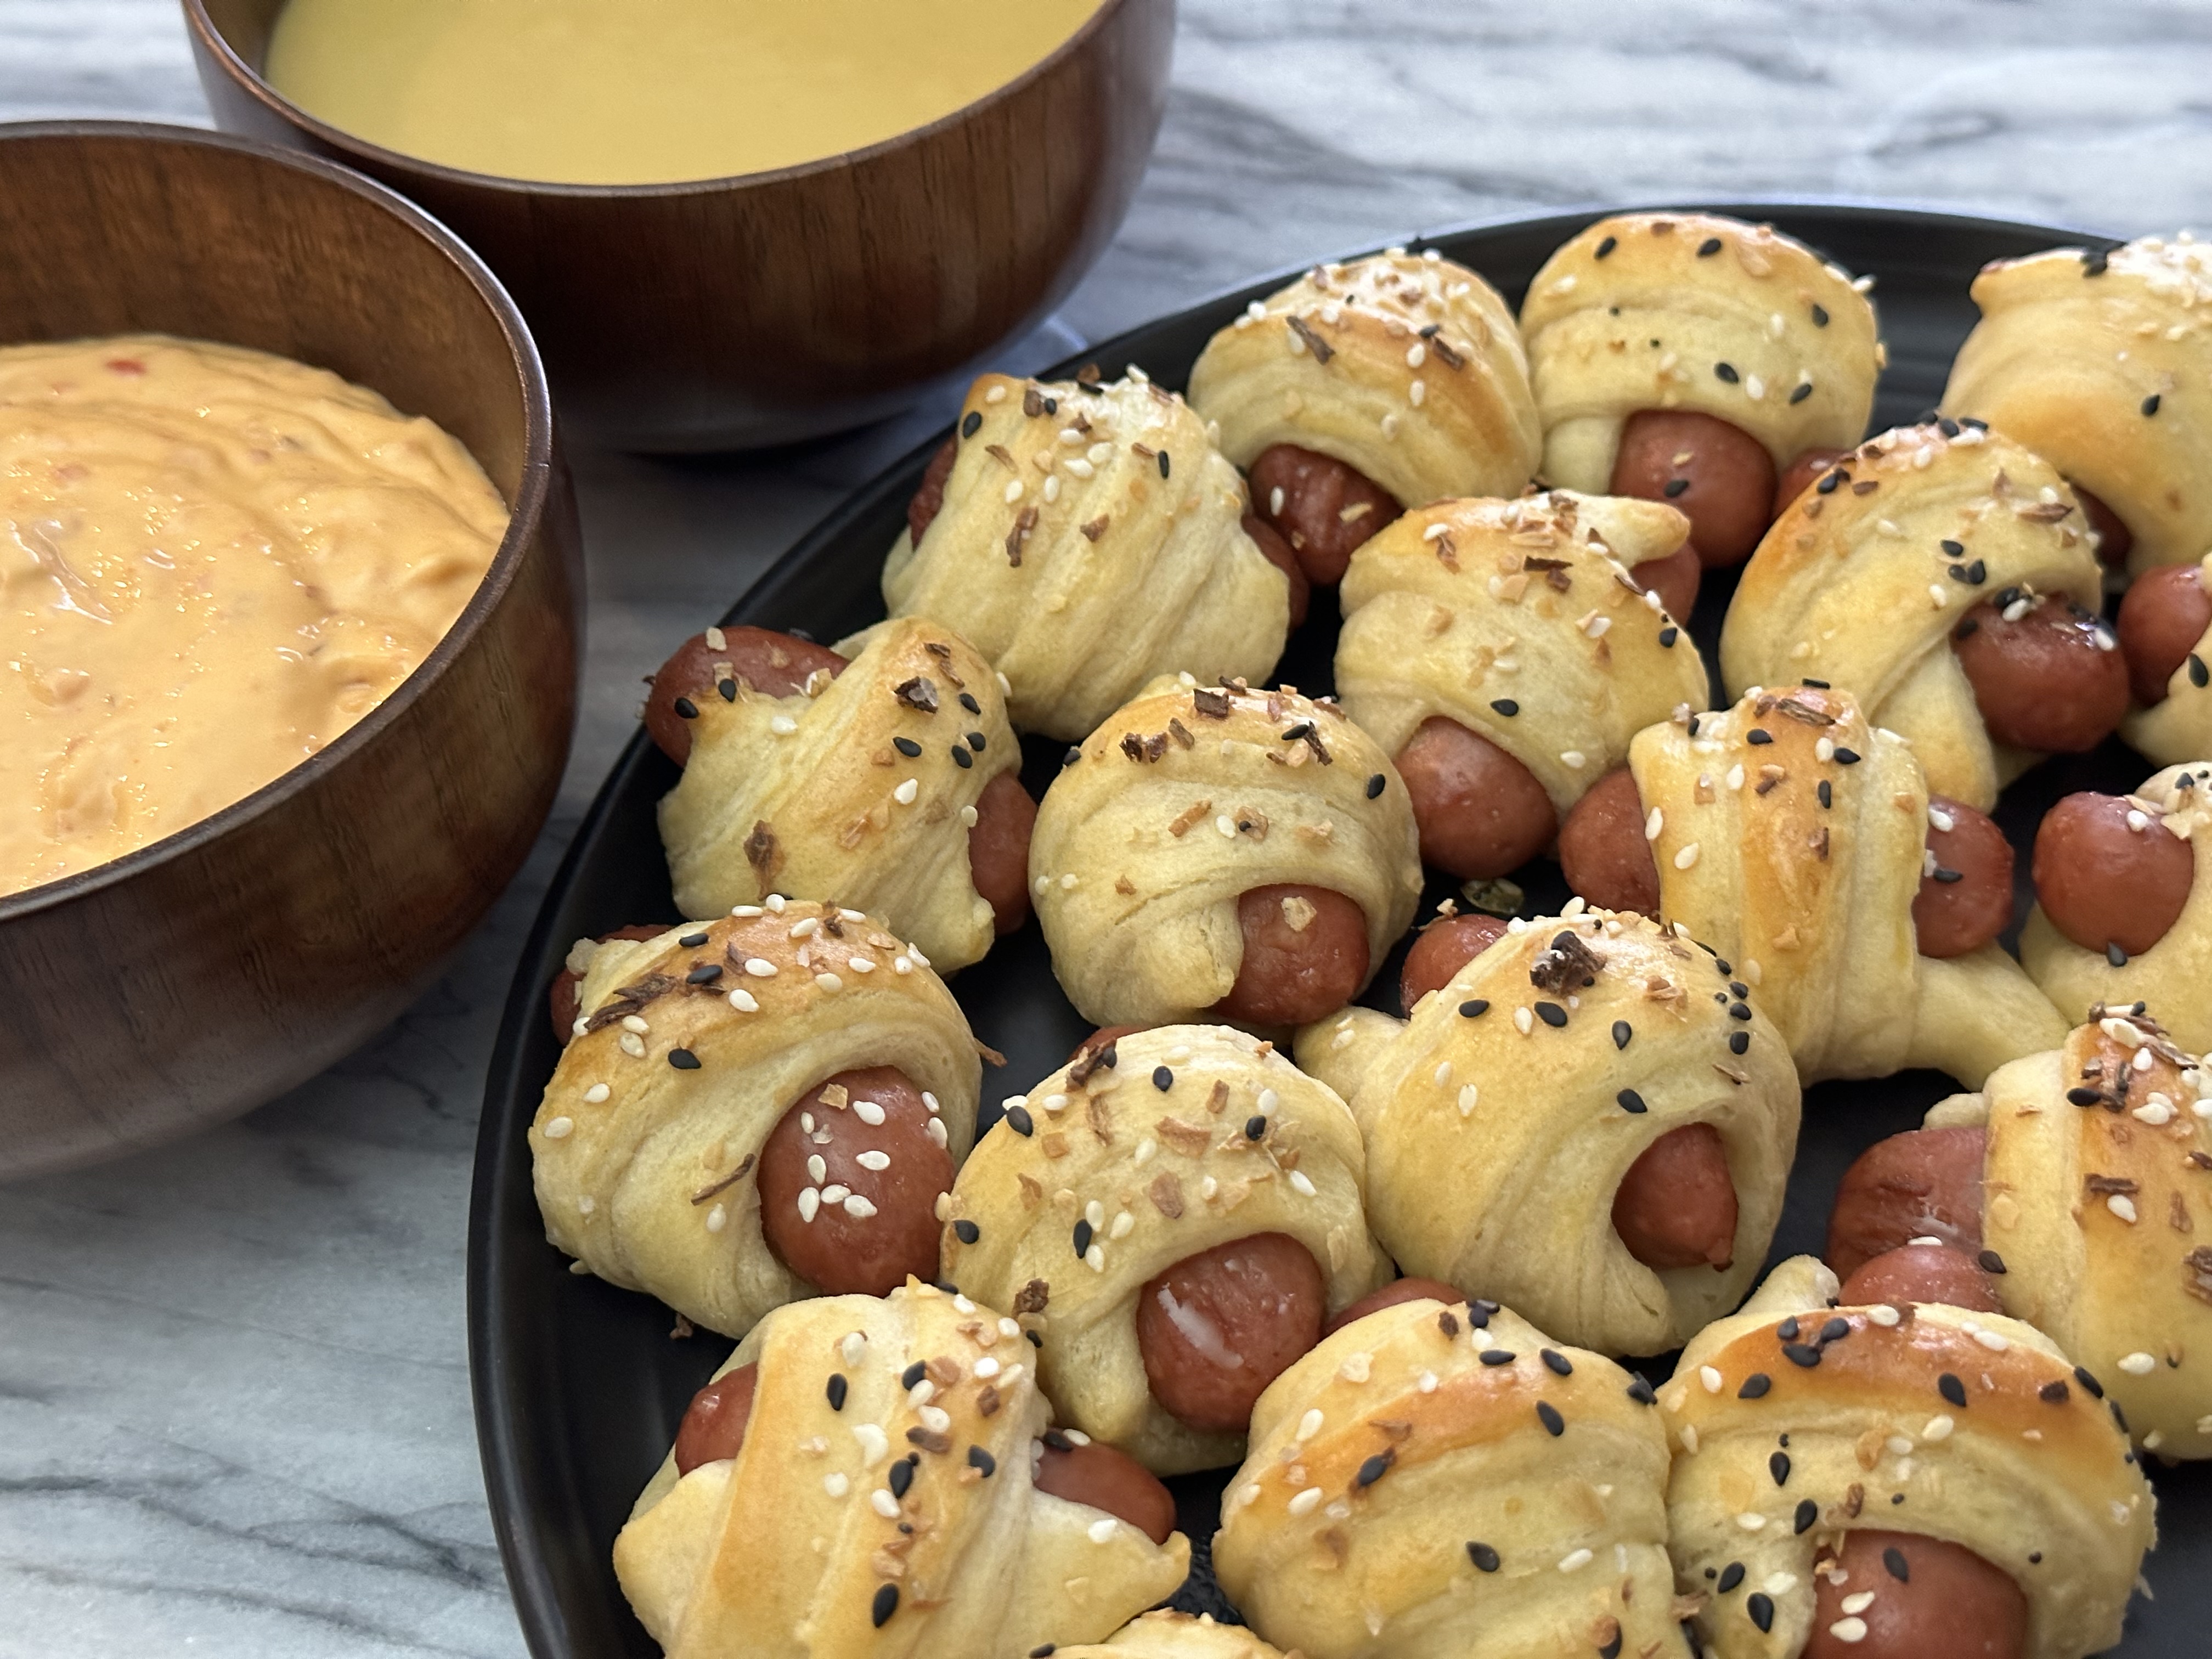 Pigs in a blanket on plate with dipping sauces.